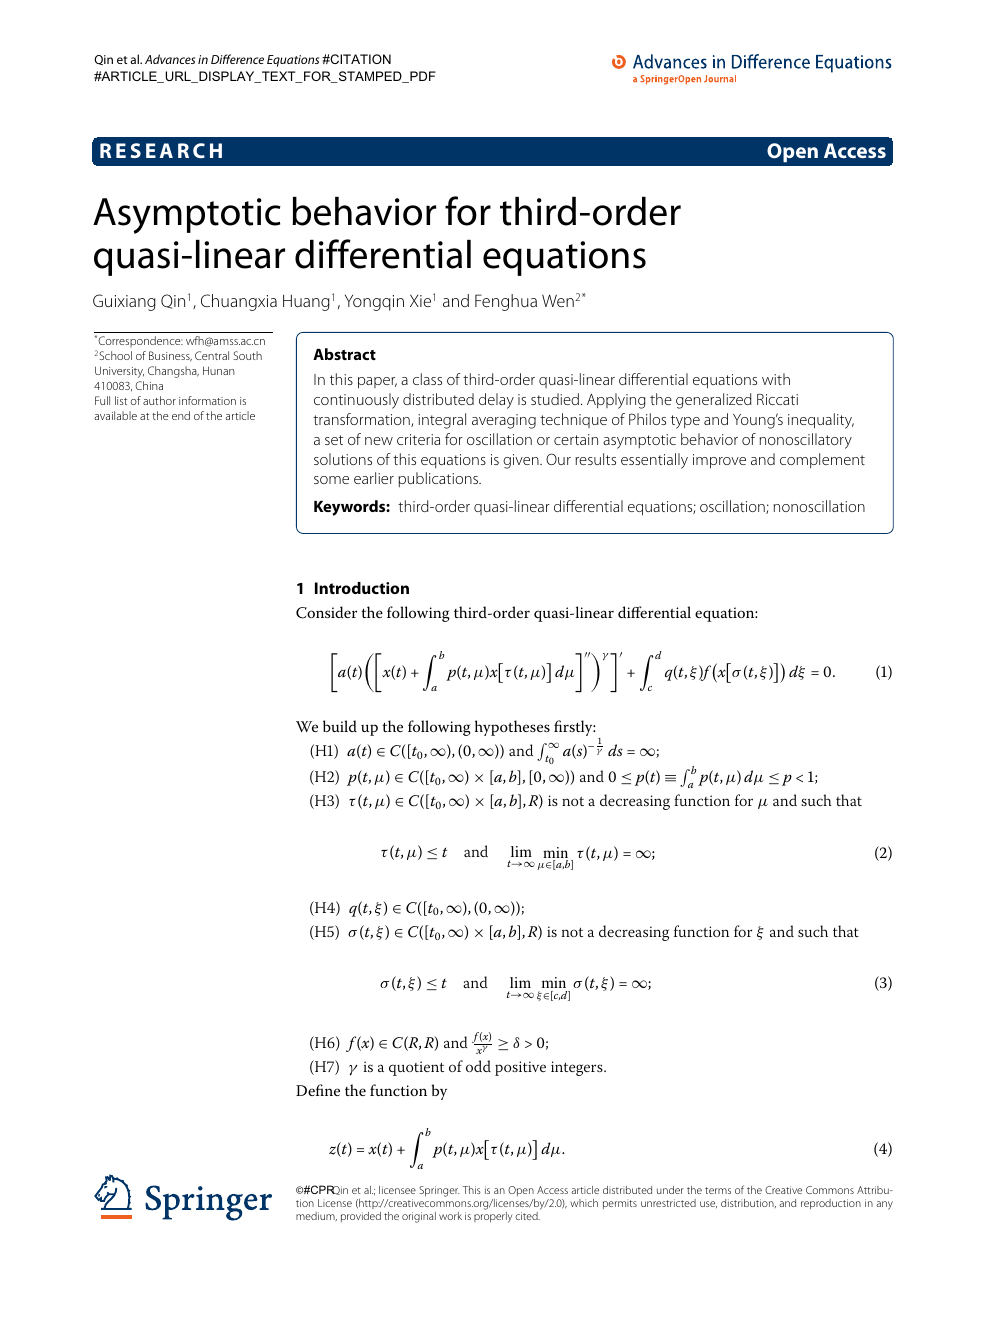 Asymptotic Behavior For Third Order Quasi Linear Differential Equations Topic Of Research Paper In Mathematics Download Scholarly Article Pdf And Read For Free On Cyberleninka Open Science Hub